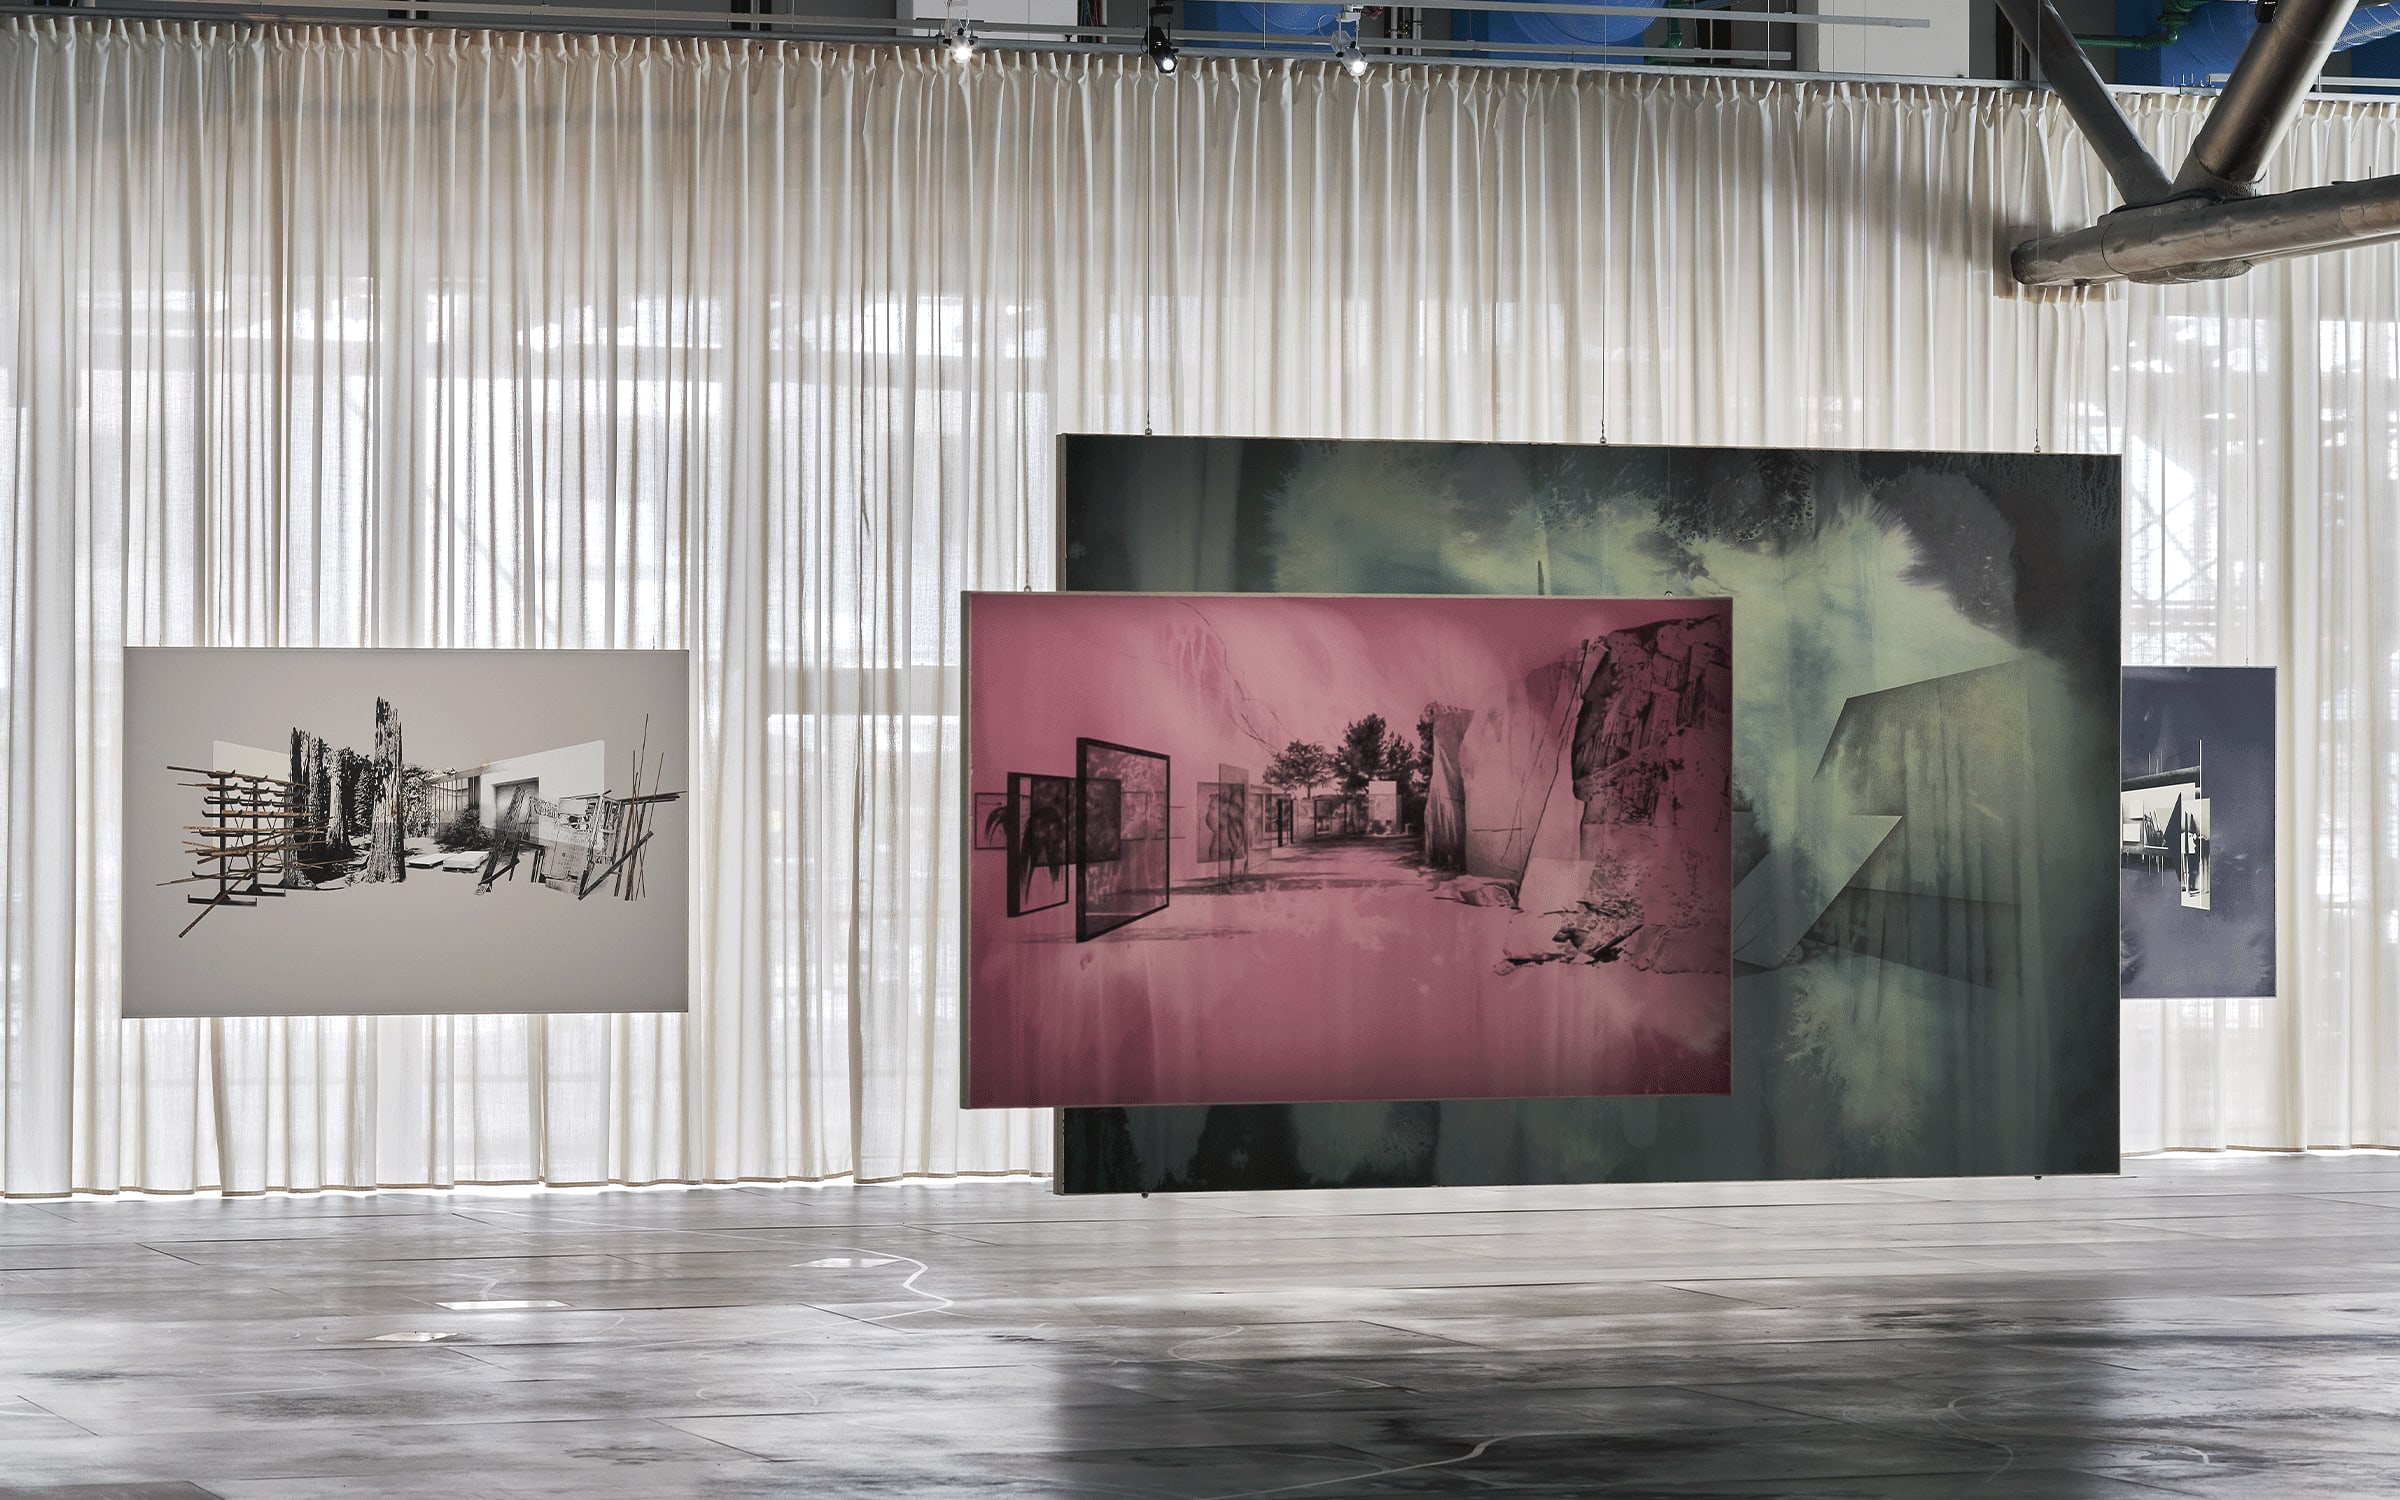 Installation view of Tatiana Trouvé's exhibition ‘The Great Atlas of Disorientation’ at the Centre Pompidou, Paris, 2022. Courtesy of the artist and Gagosian. Photograph by Thomas Lannes.